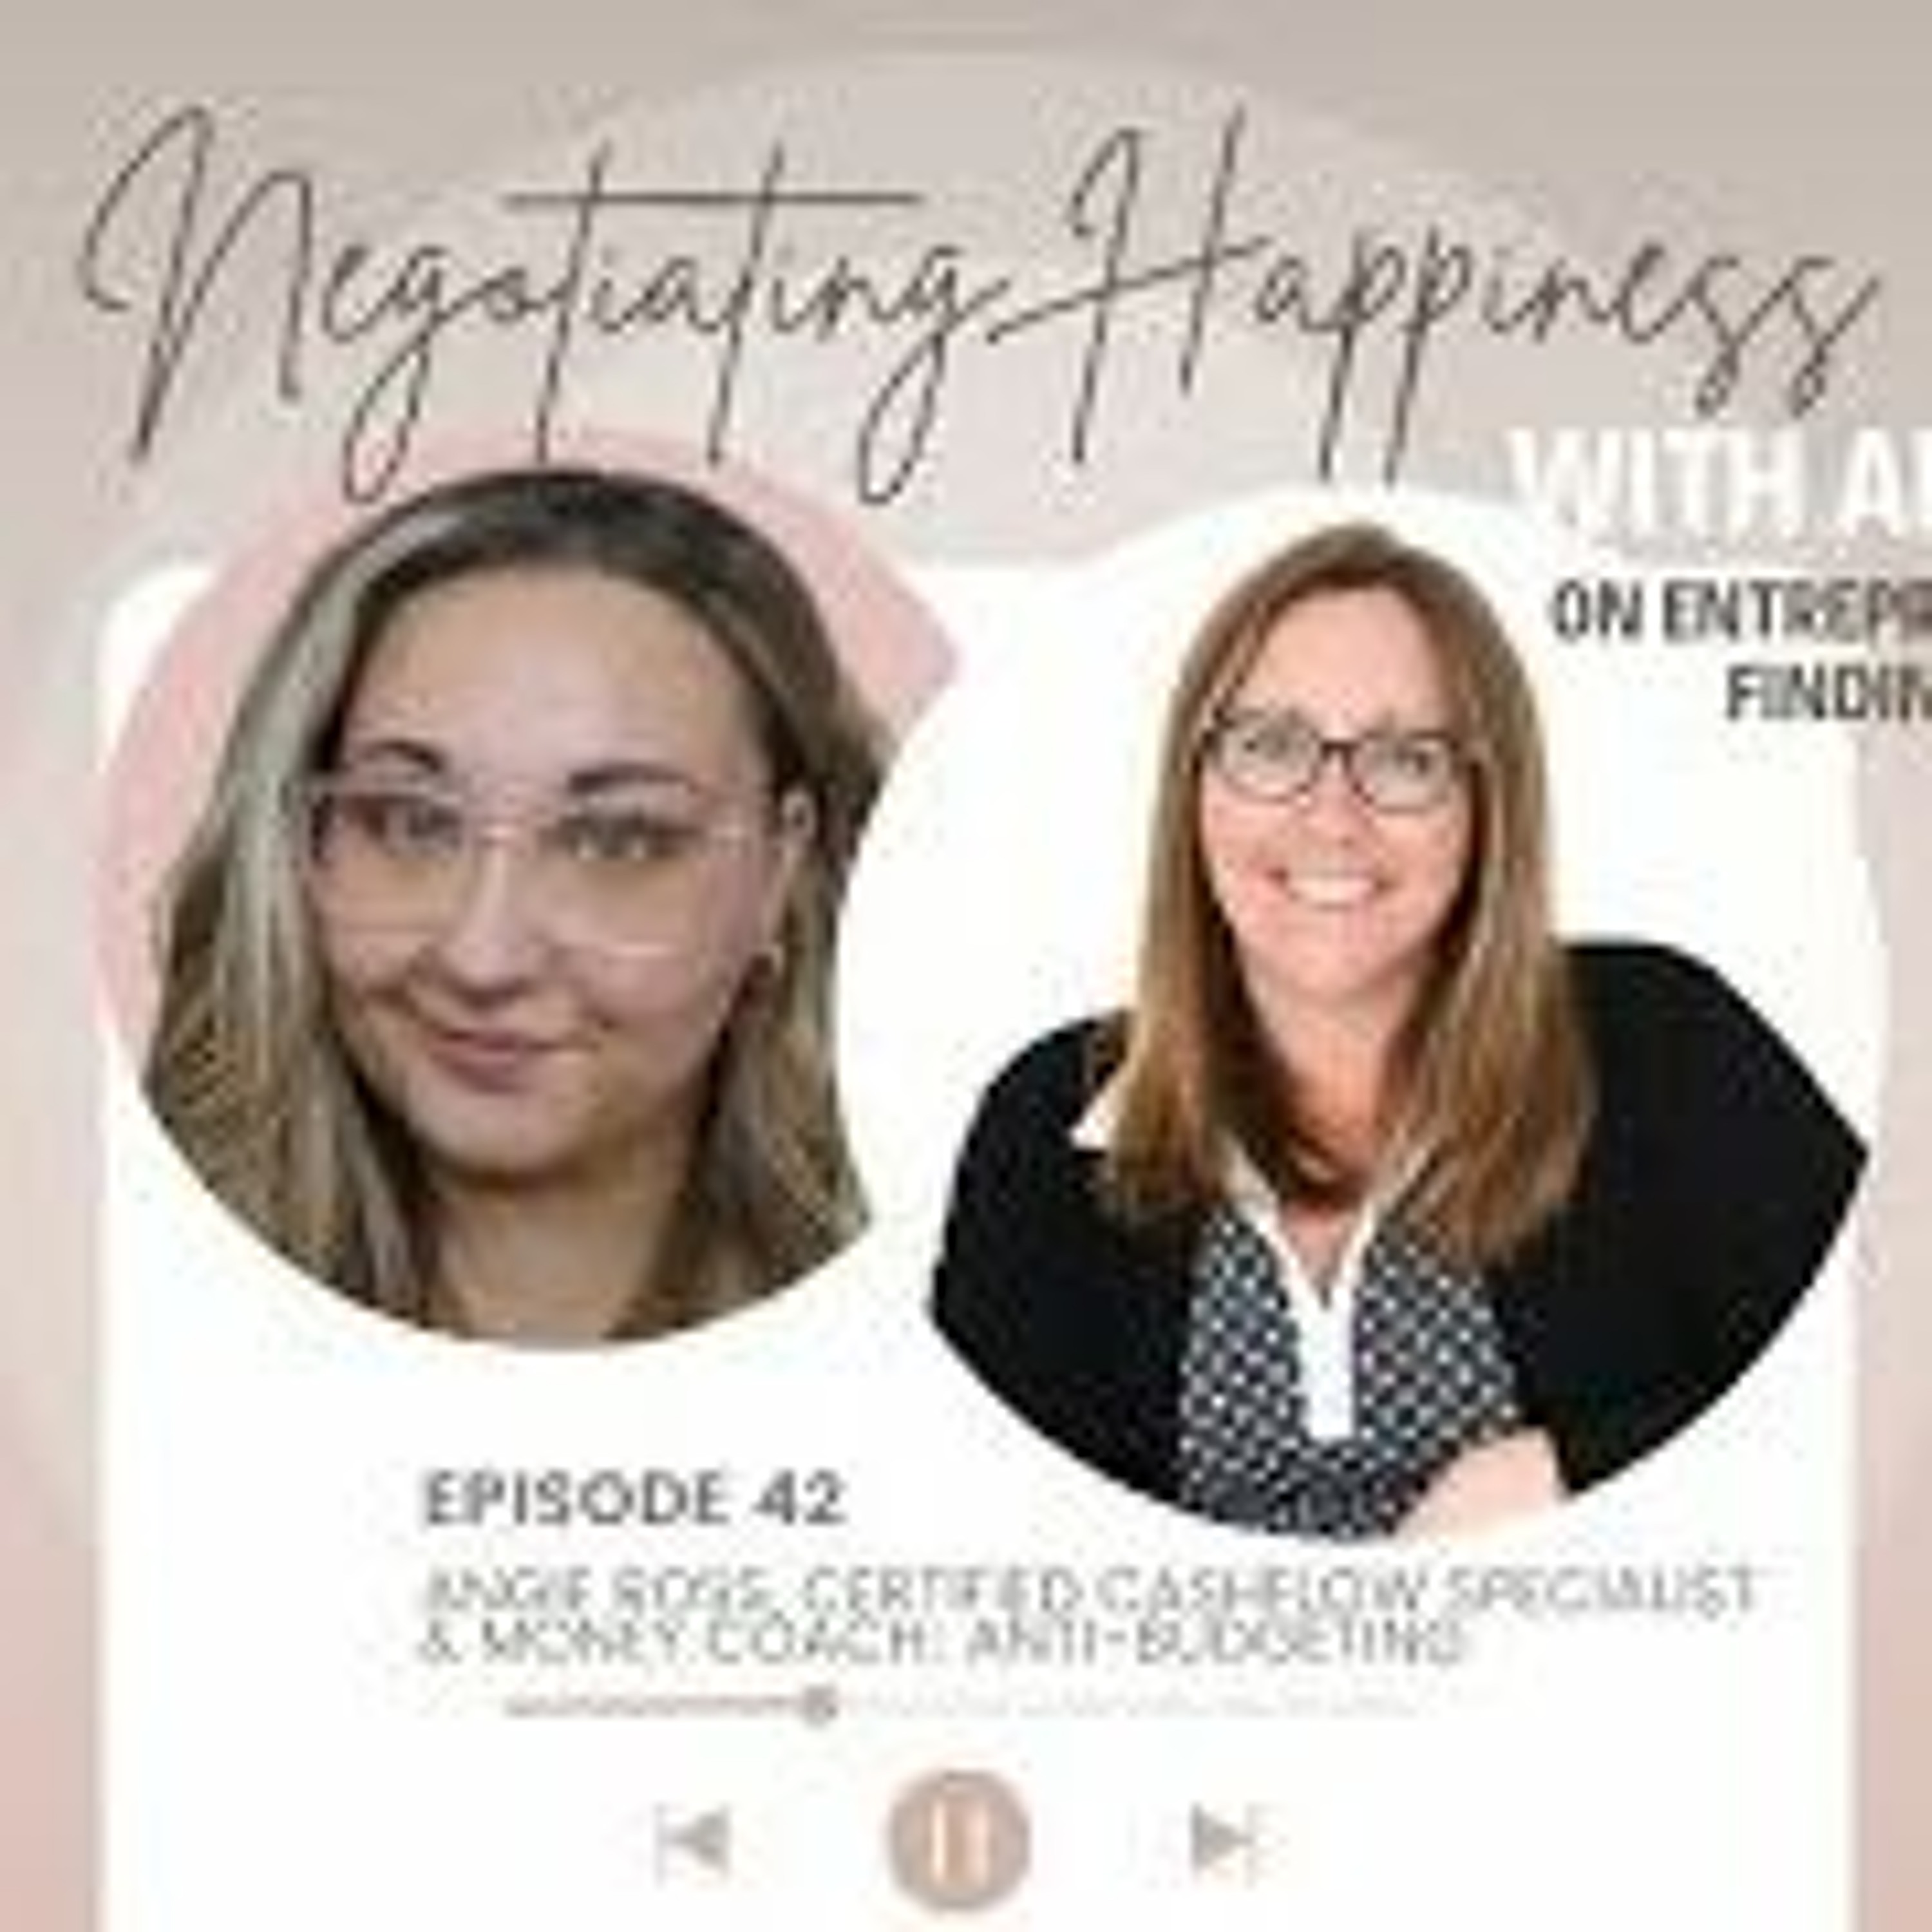 Negotiating Happiness  Ep 42 Angie Ross  Certified CashFlow Specialist & Money Coach  Anti